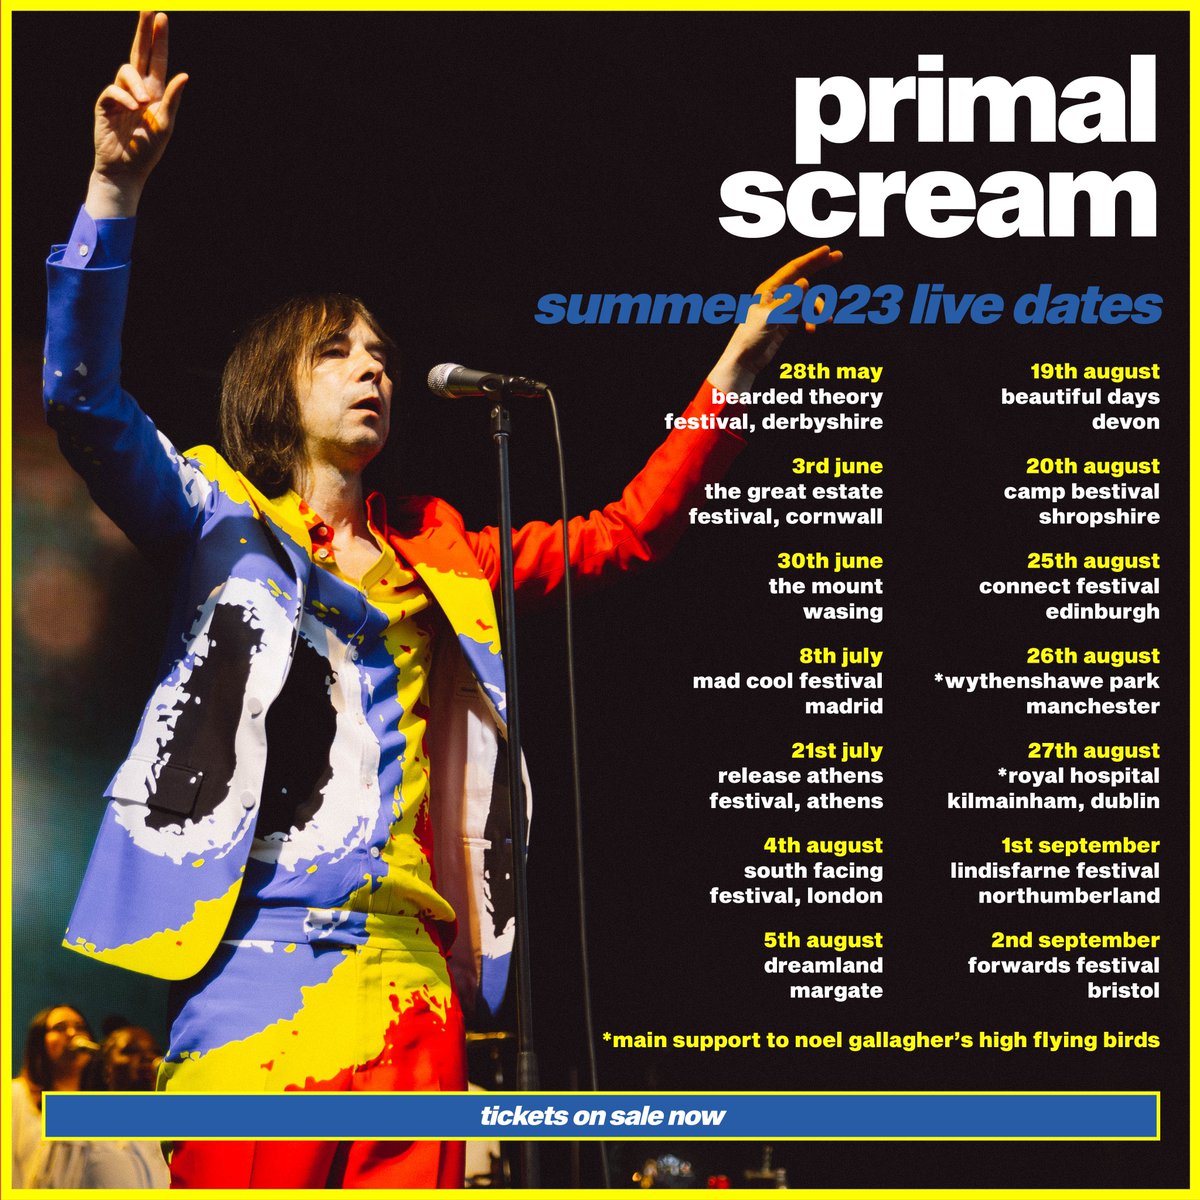 This summer we are going out with a 12-piece band - adding Alex White from @FatWhiteFamily on sax, Terry Miles of Mozart Estate on keys and our friends from the @HouseChoir. We're very excited about this line-up! Tickets for all our summer shows here: primalscream.tix.to/live2023